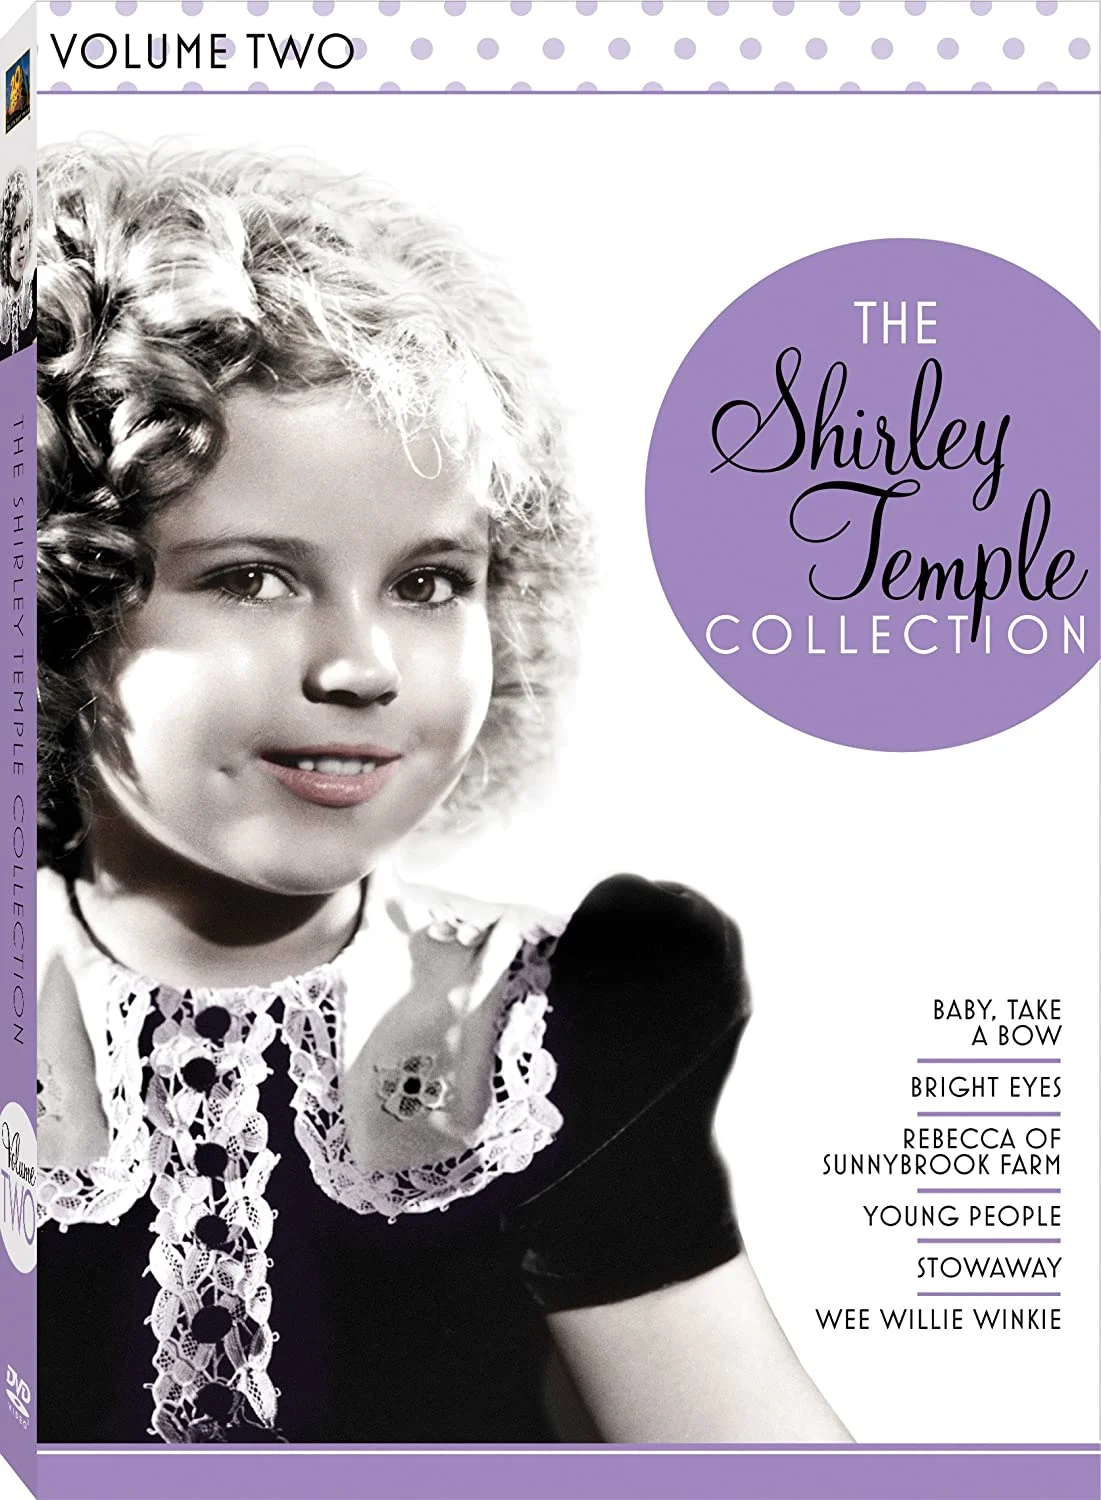 Shirley Temple Collection, The: Vol. 2 (DVD) on MovieShack